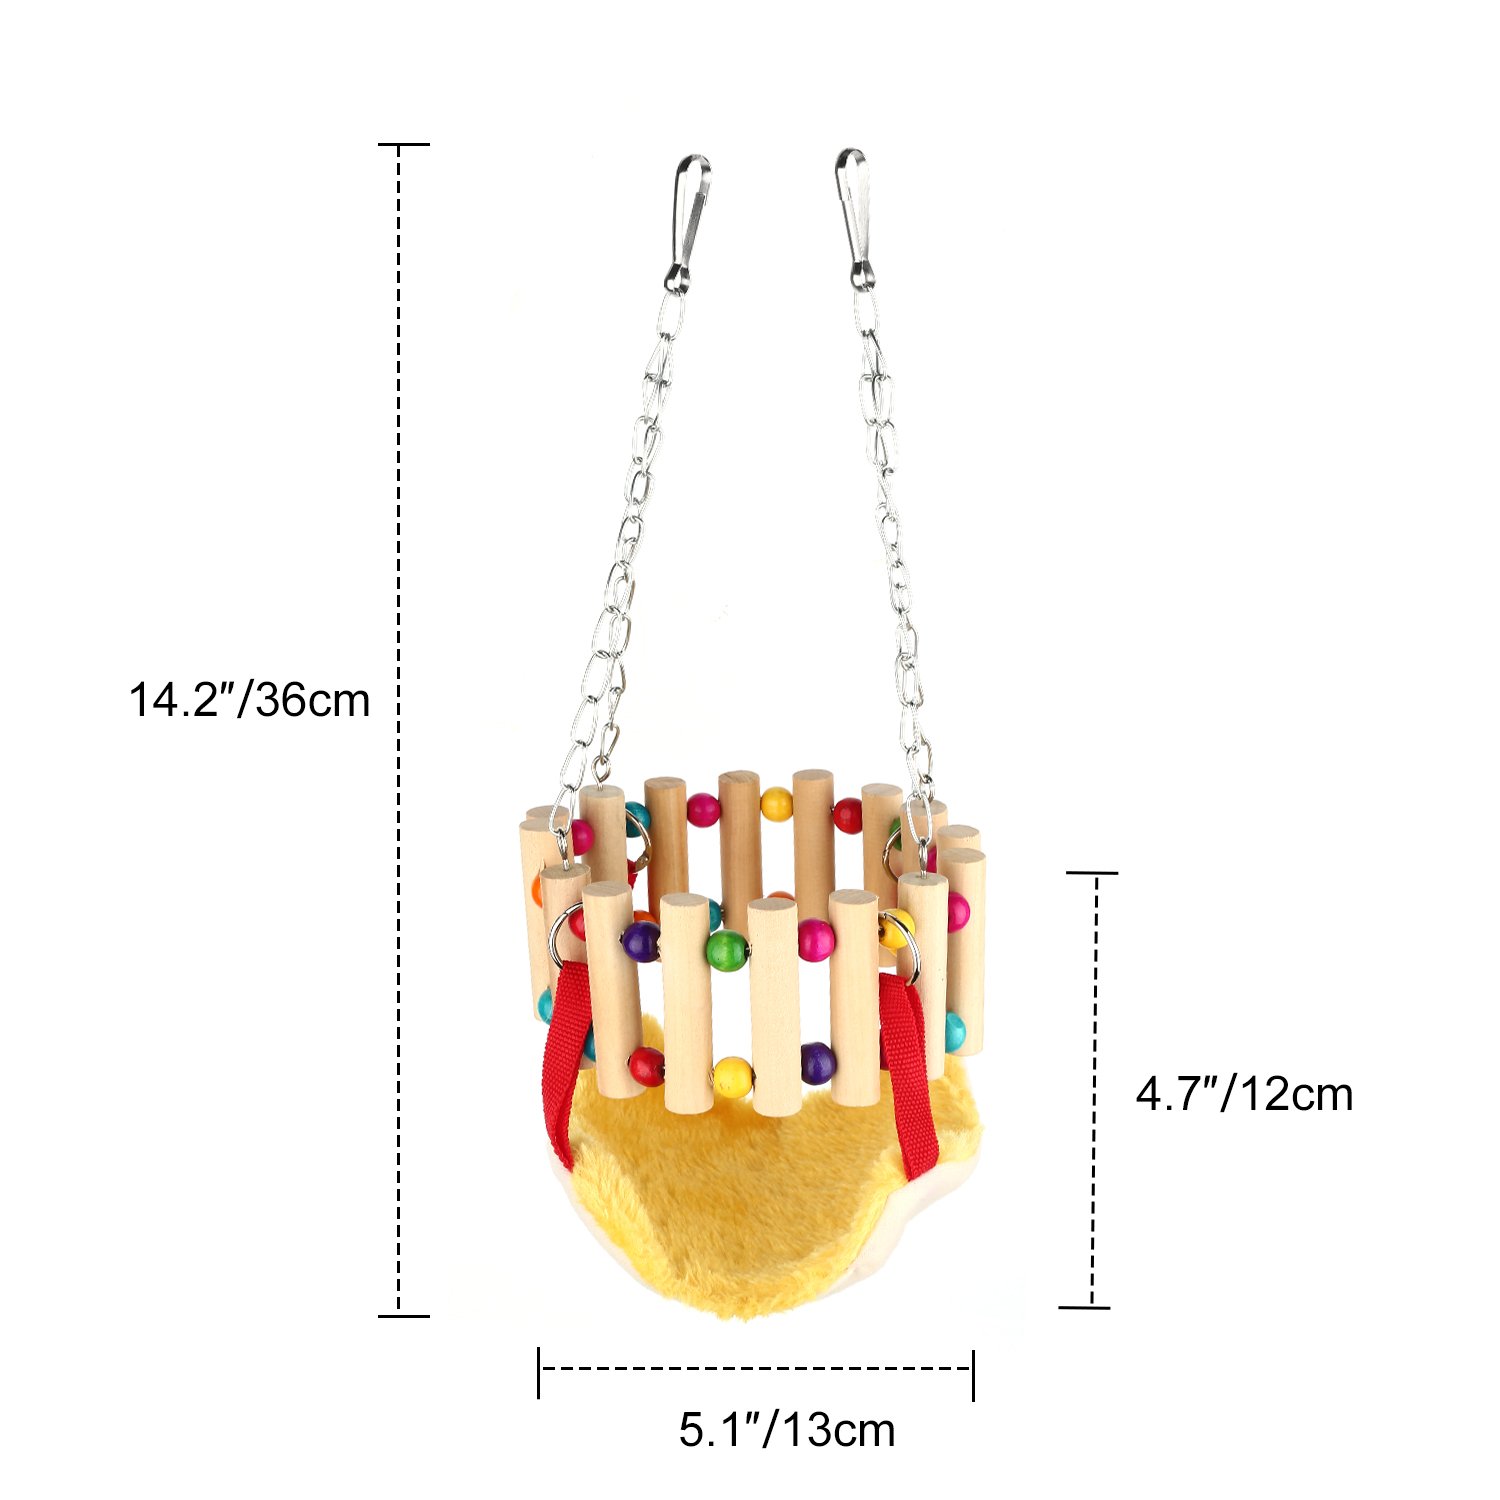 Small Pet Ladder Toy with Hammock, Parrot Cage Hanging Toy, Hamster Swing Toy, Squirrel Totoro Chinchilla Rabbit Chewing Toy